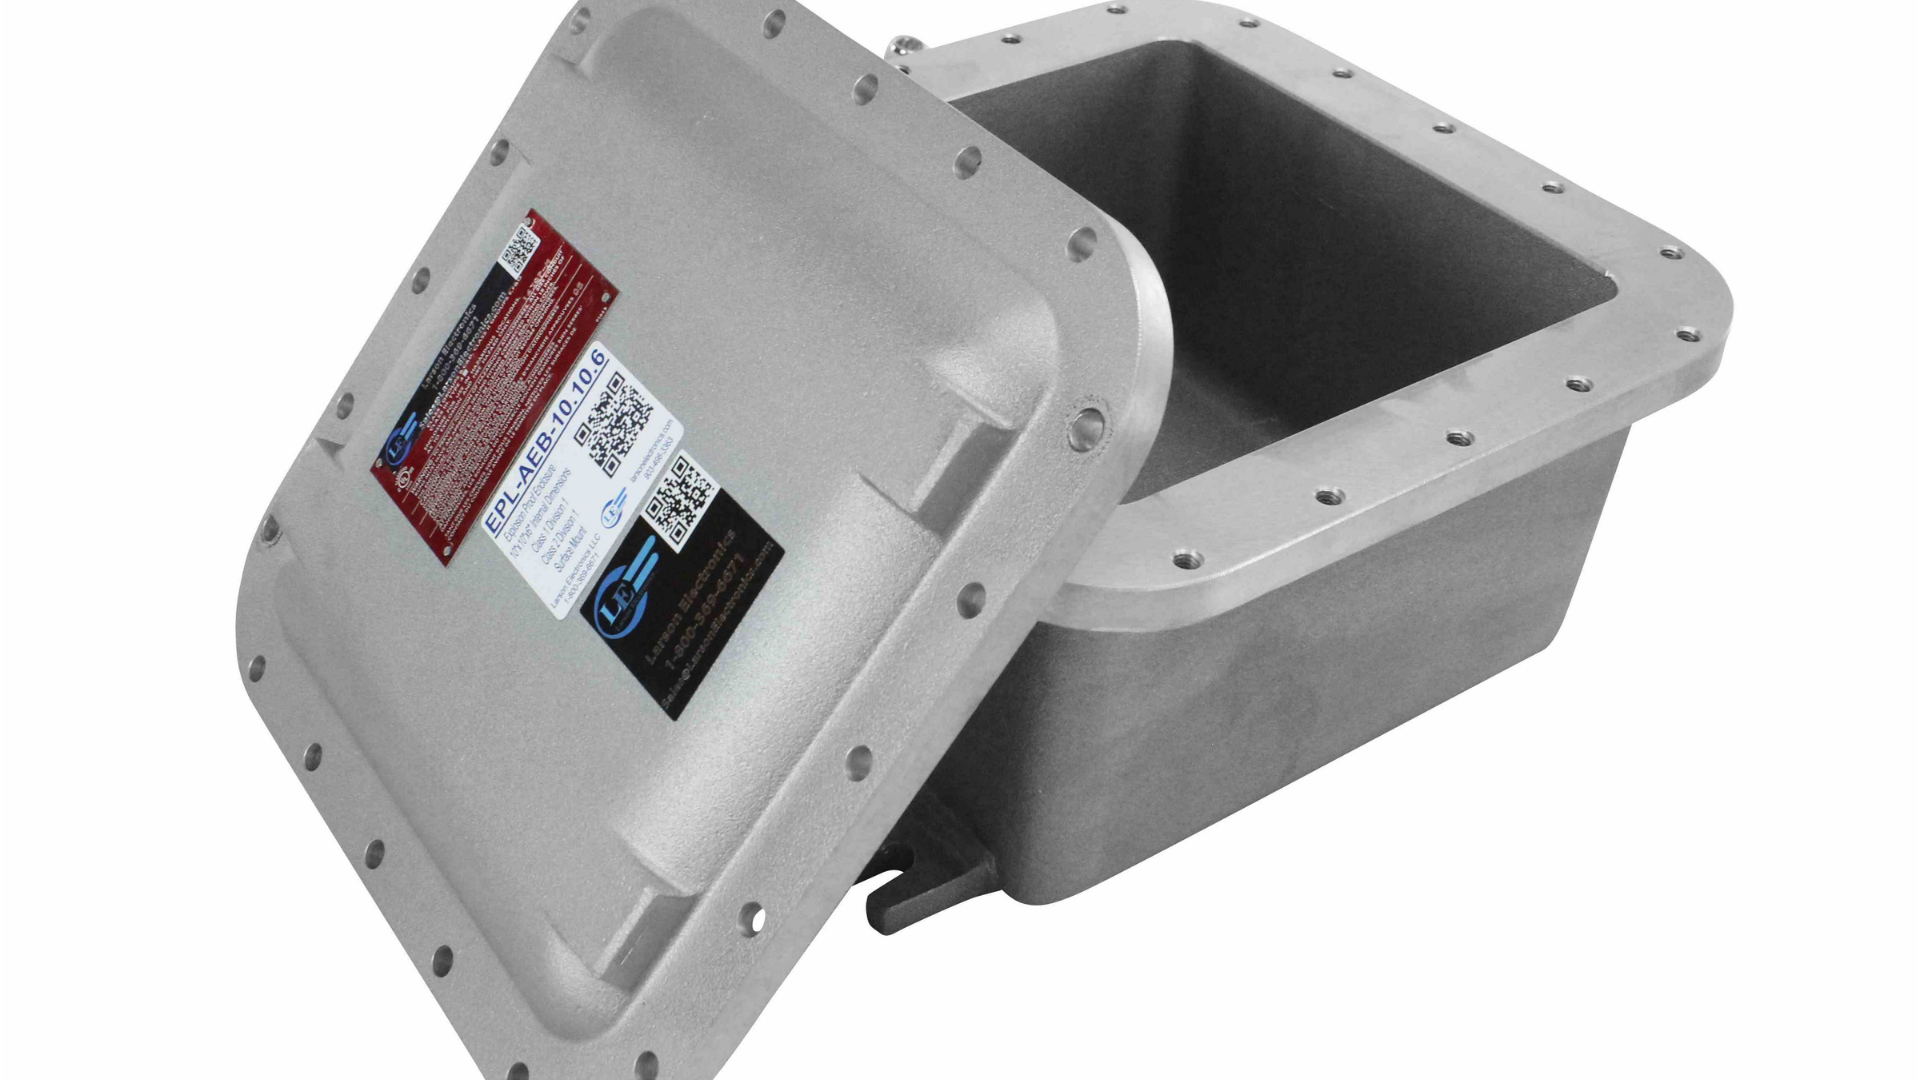 What Are Explosion Proof Enclosure Standards?